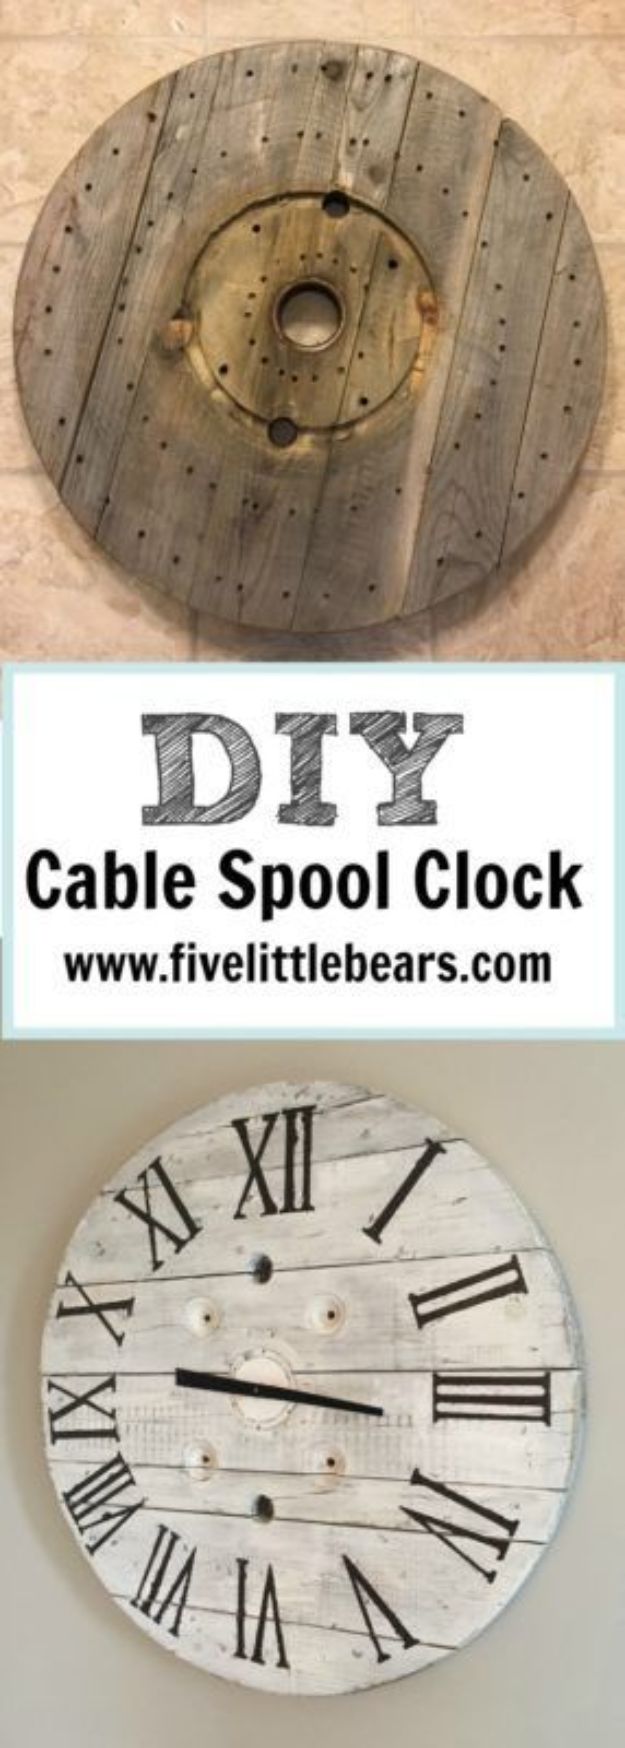 DIY Clocks - DIY Cable Spool Clock - Easy and Cheap Home Decor Ideas and Crafts for Wall Clock - Cool Bedroom and Living Room Decor, Farmhouse and Modern